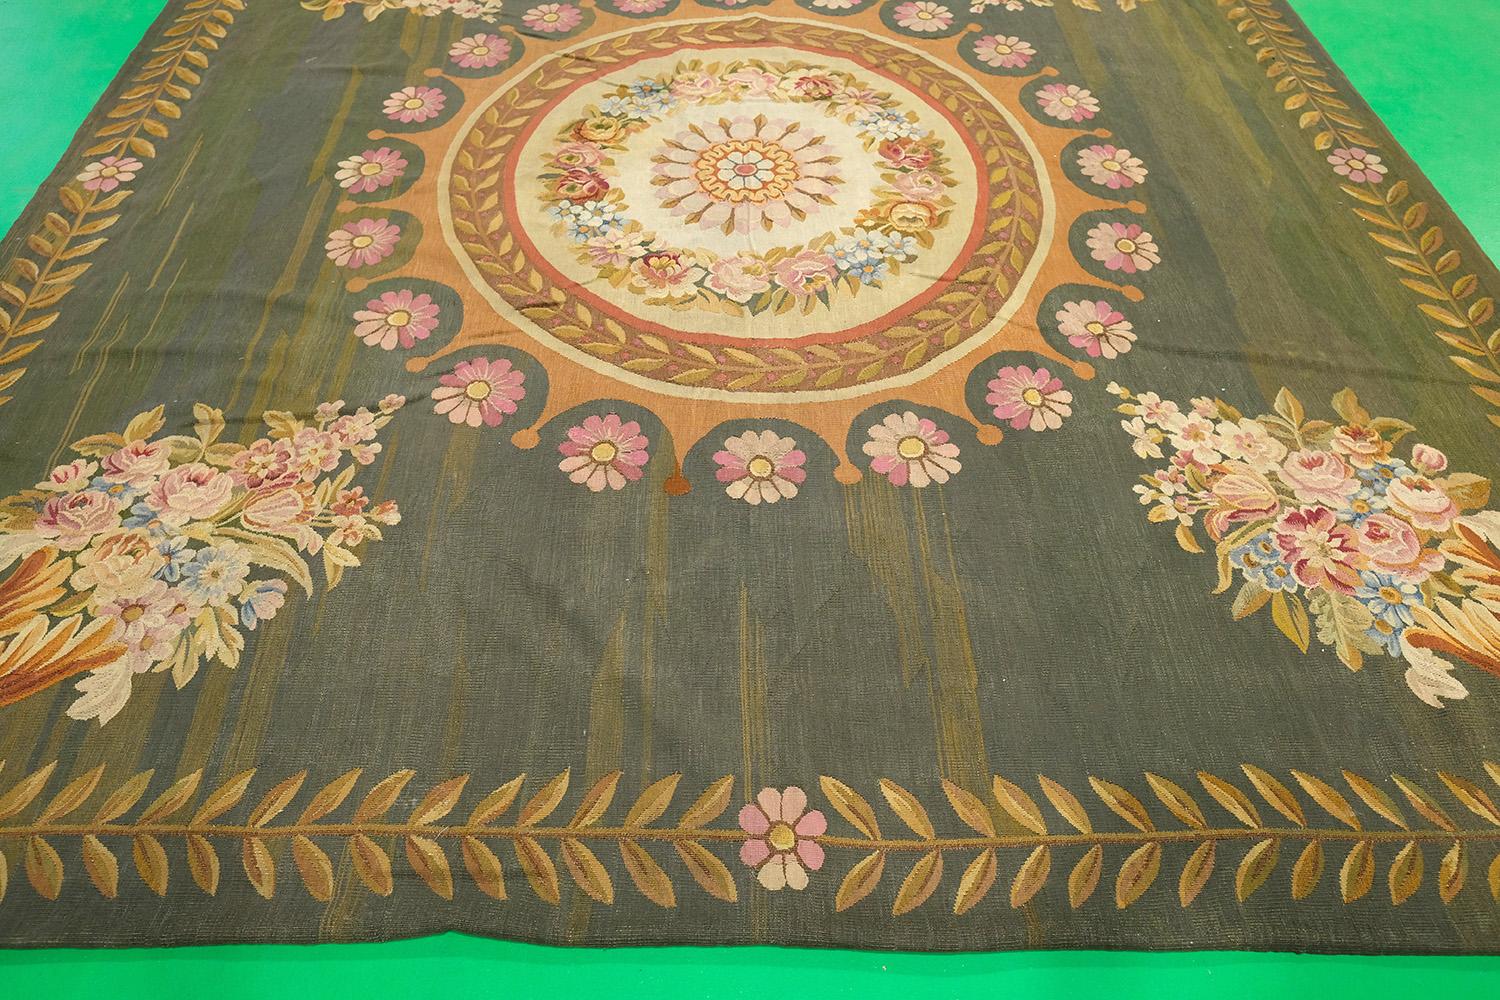 Mehraban antique French Empire Aubusson-design tapestry, made in France. The motif includes floral and medallion patterns. Item is a flat weave wool rug in green, brown, gold, and pink.


Rug Number 55008
Size 8' 6